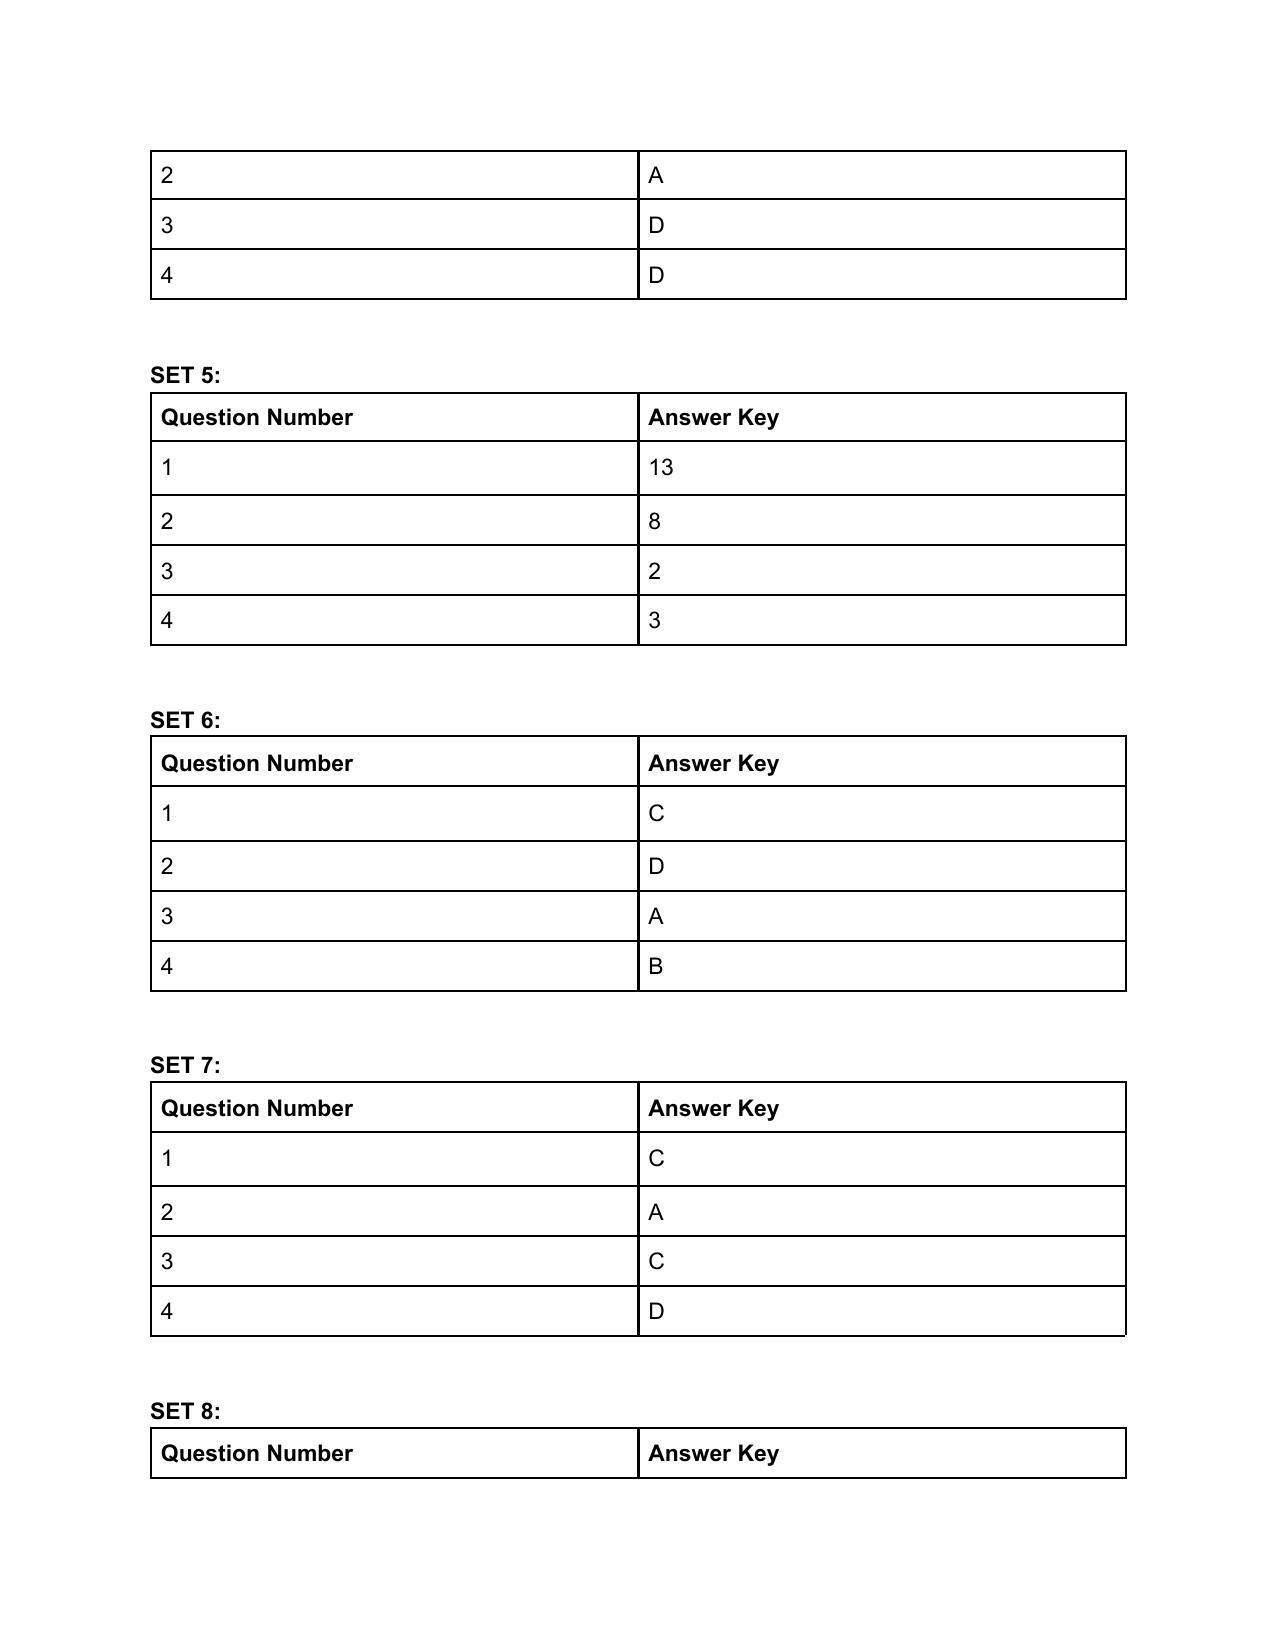 CAT 2019 CAT DILR Slot 2 Answer Key - Page 2